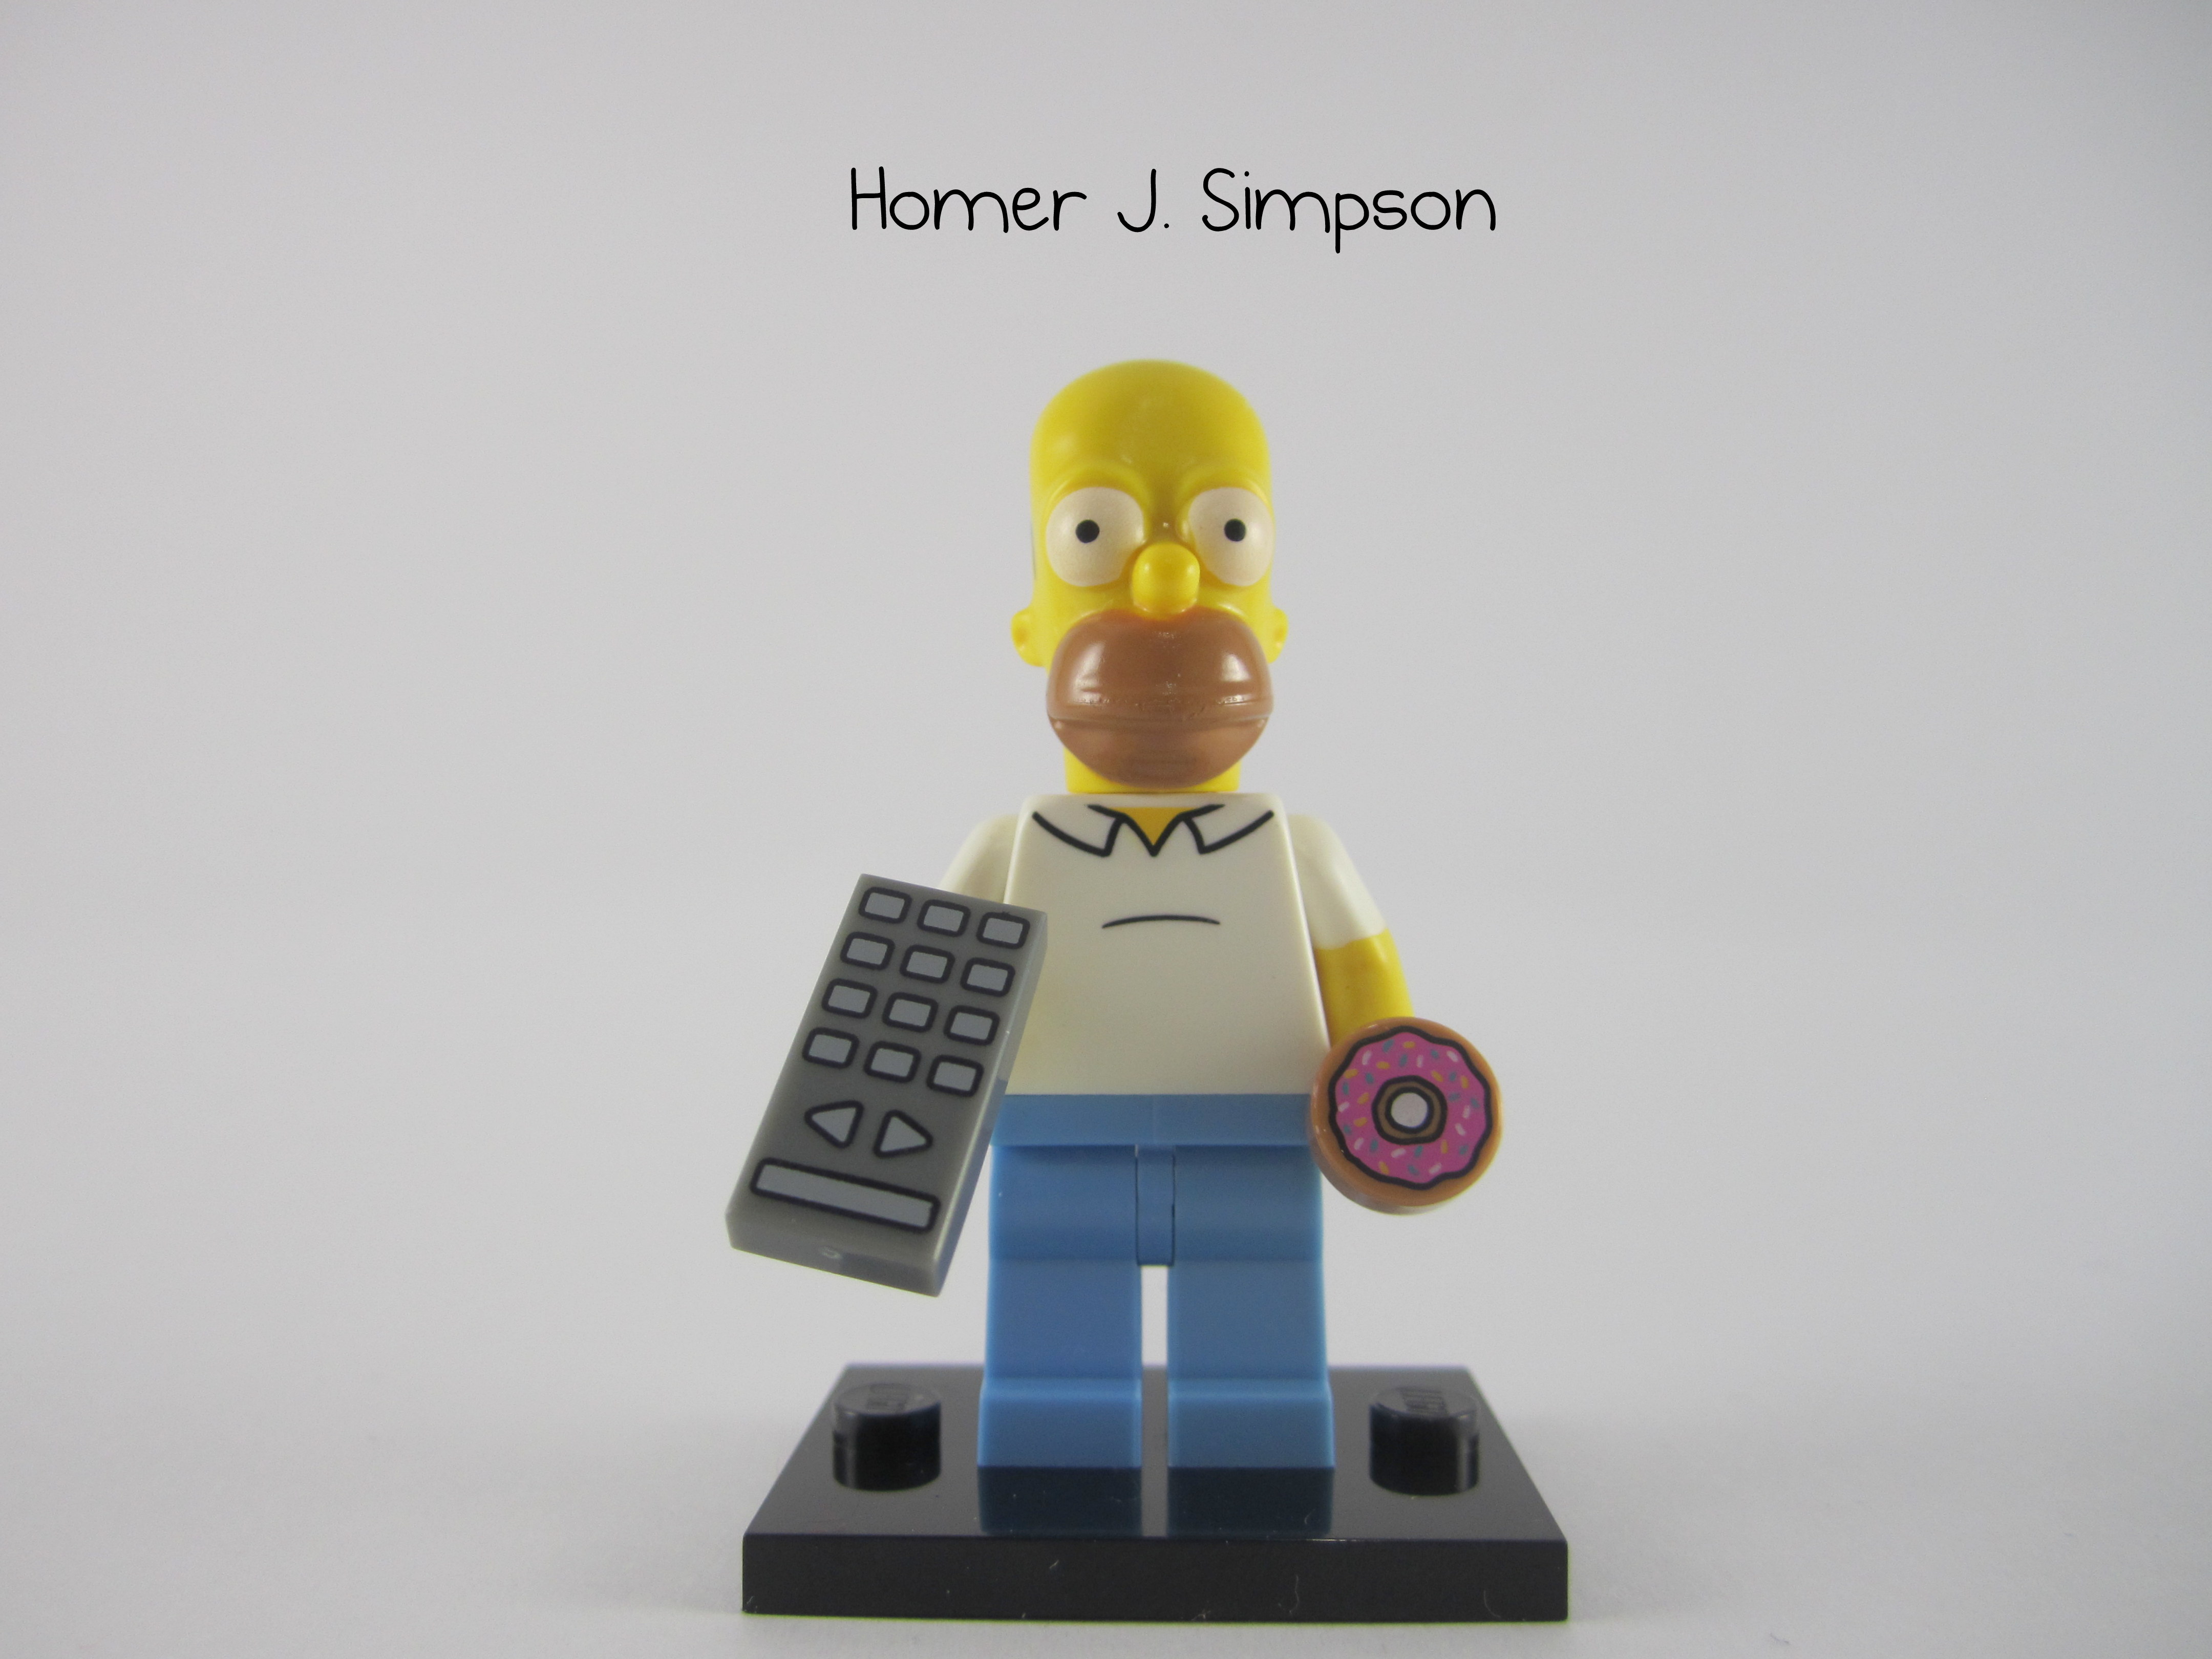 Doughnuts For Homer Simpson Minifigure  1x1 Printed Round Tile 2 x LEGO Donuts